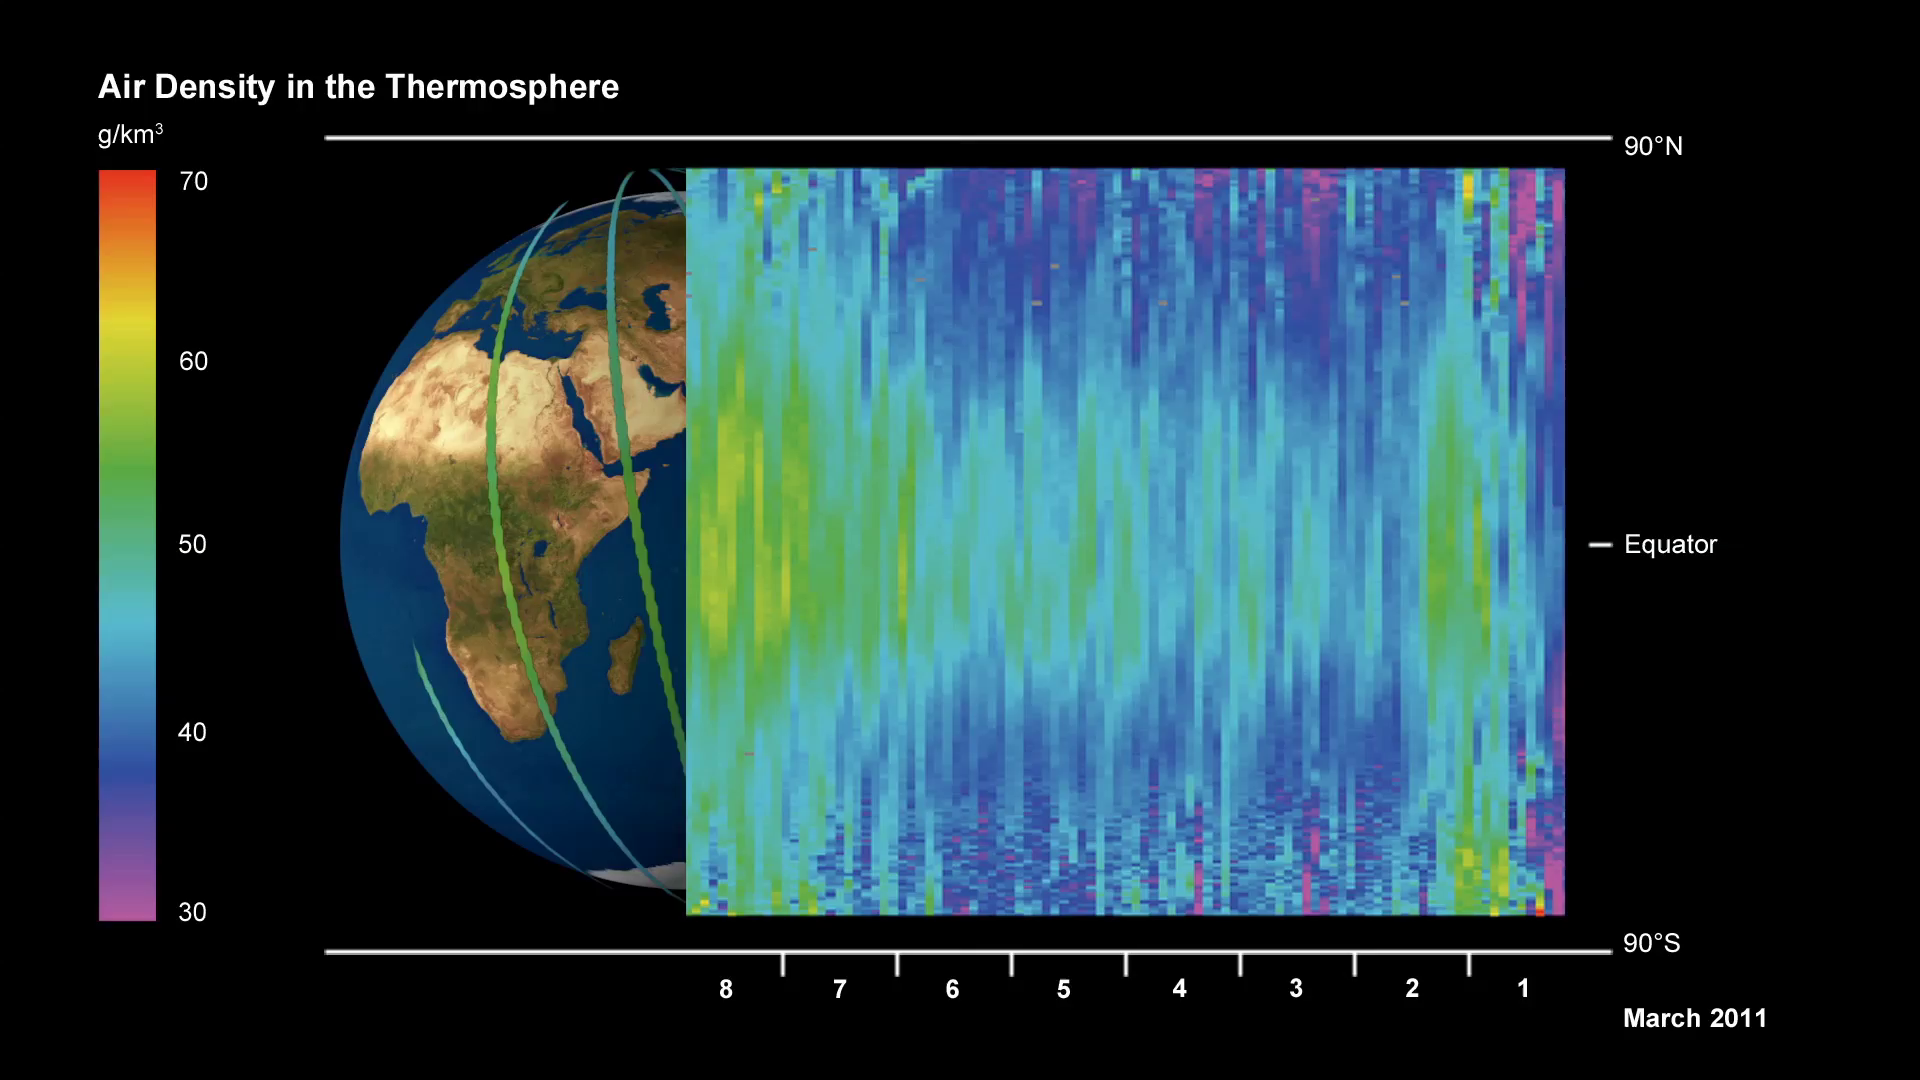 GOCE detected sound waves from the earthquake that hit Japan on 11 March 2011 